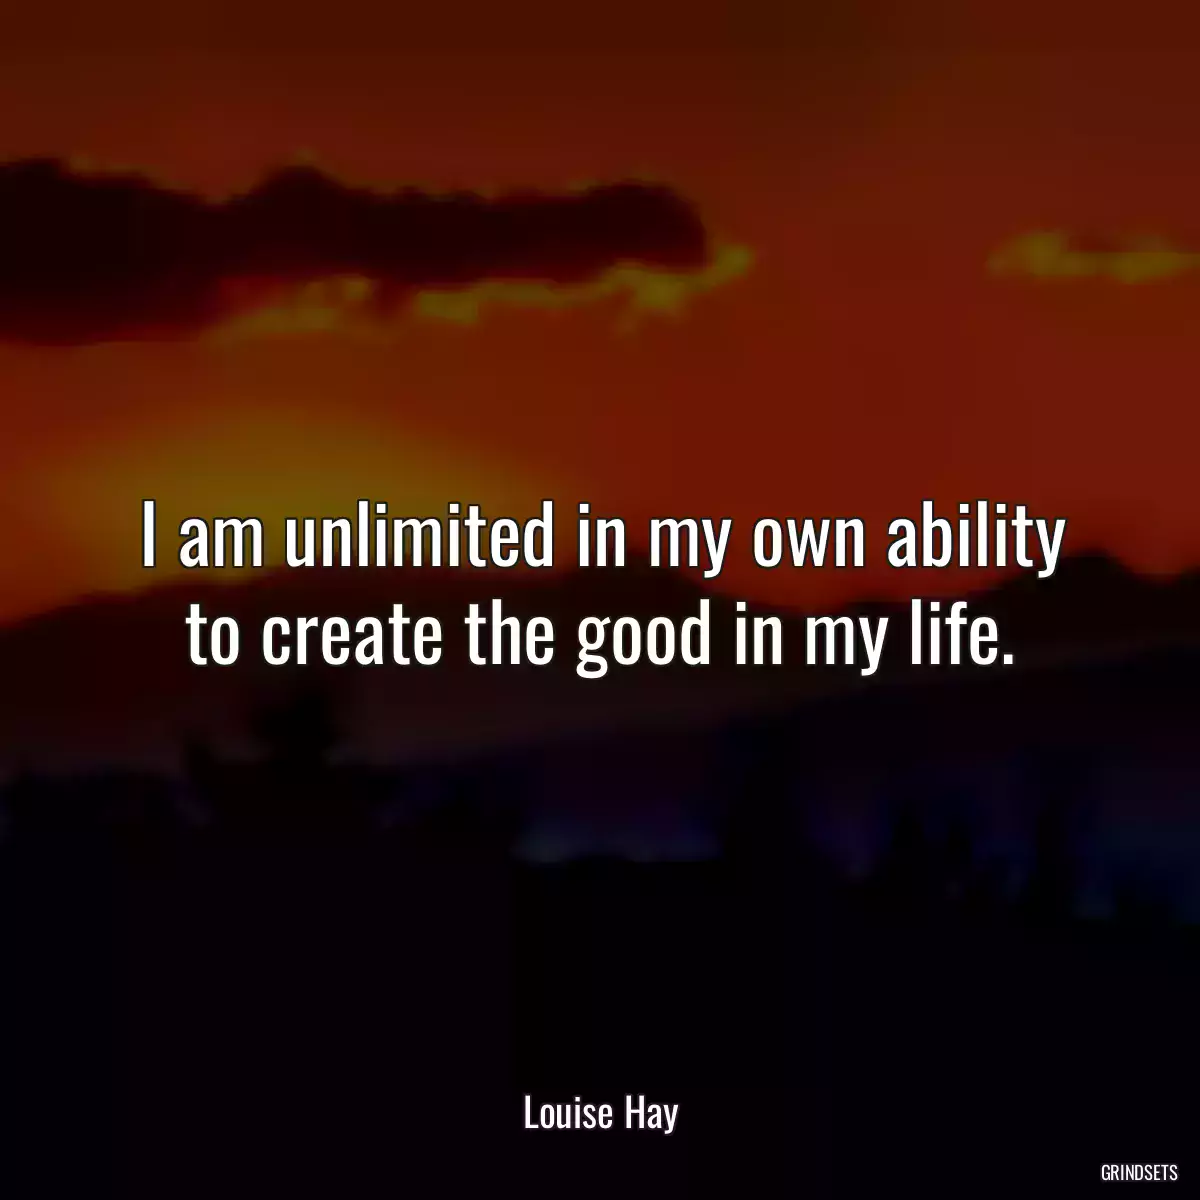 I am unlimited in my own ability to create the good in my life.